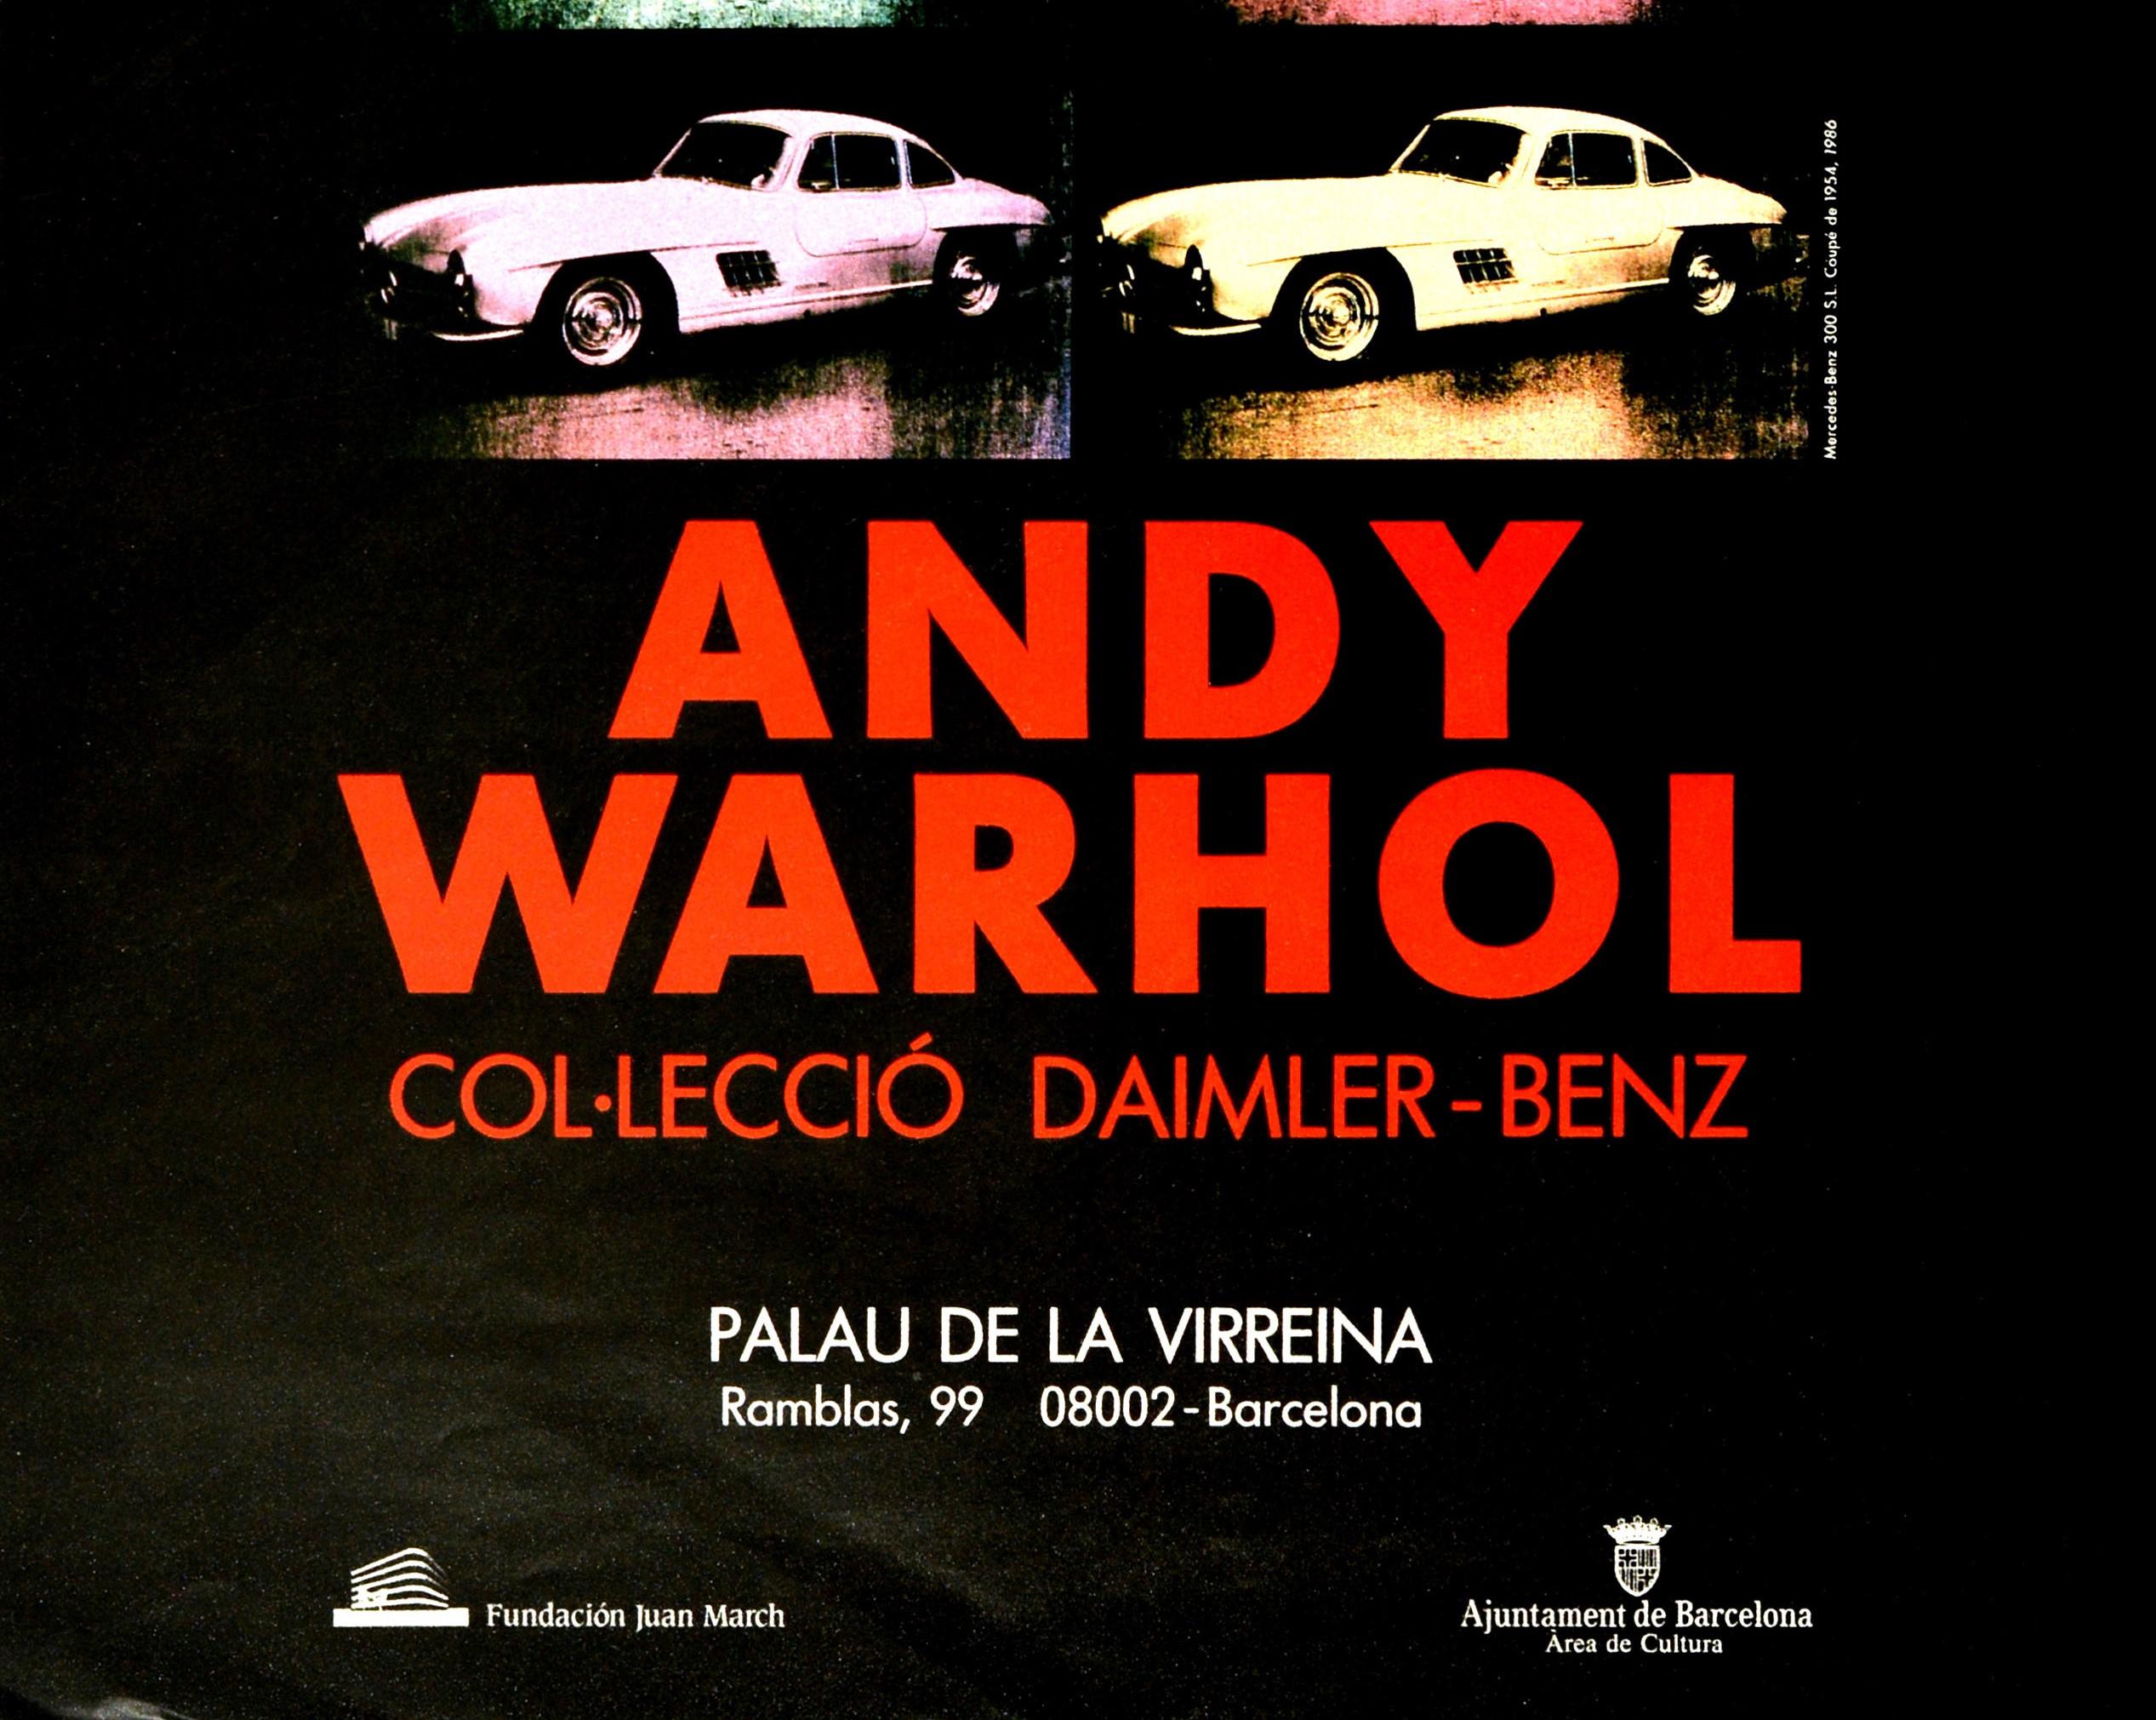 Original vintage poster promoting the Cars exhibition of Andy Warhol's art from the collection of Daimler Benz featuring a great Pop Art image of the iconic Mercedes Benz 300SL gullwing car in different bright colours against the black background